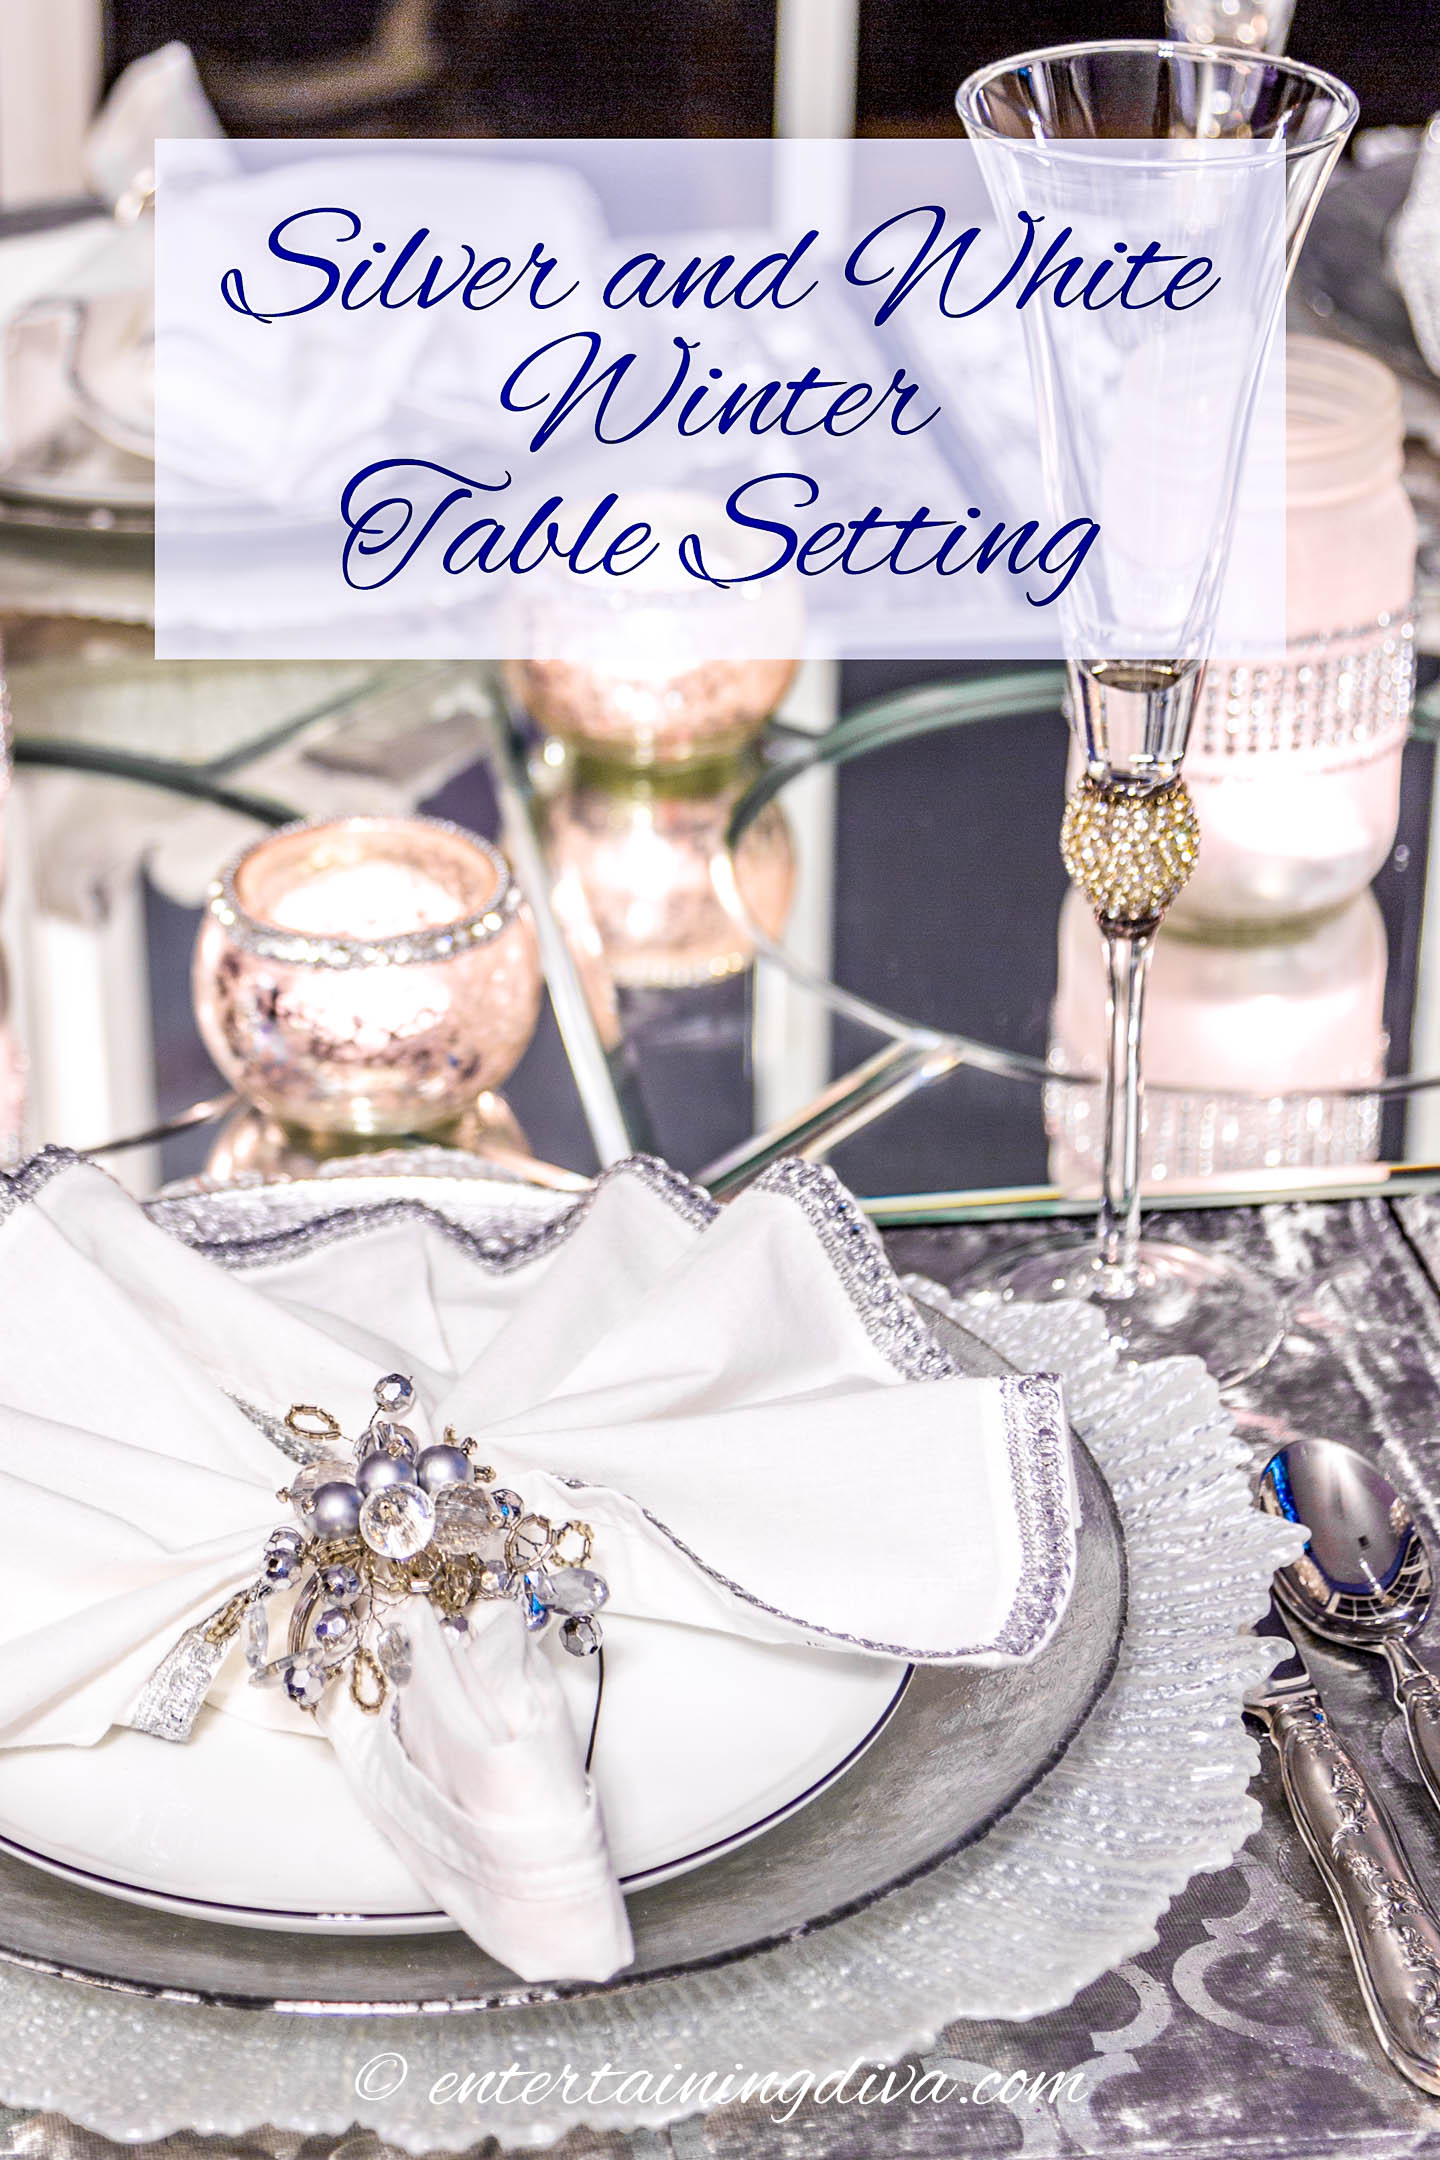 Looking for some ideas on a white and silver winter table setting for Christmas, New Year's or a winter themed party? Click here to get some inspiration. | Silver and White Winter Table Setting